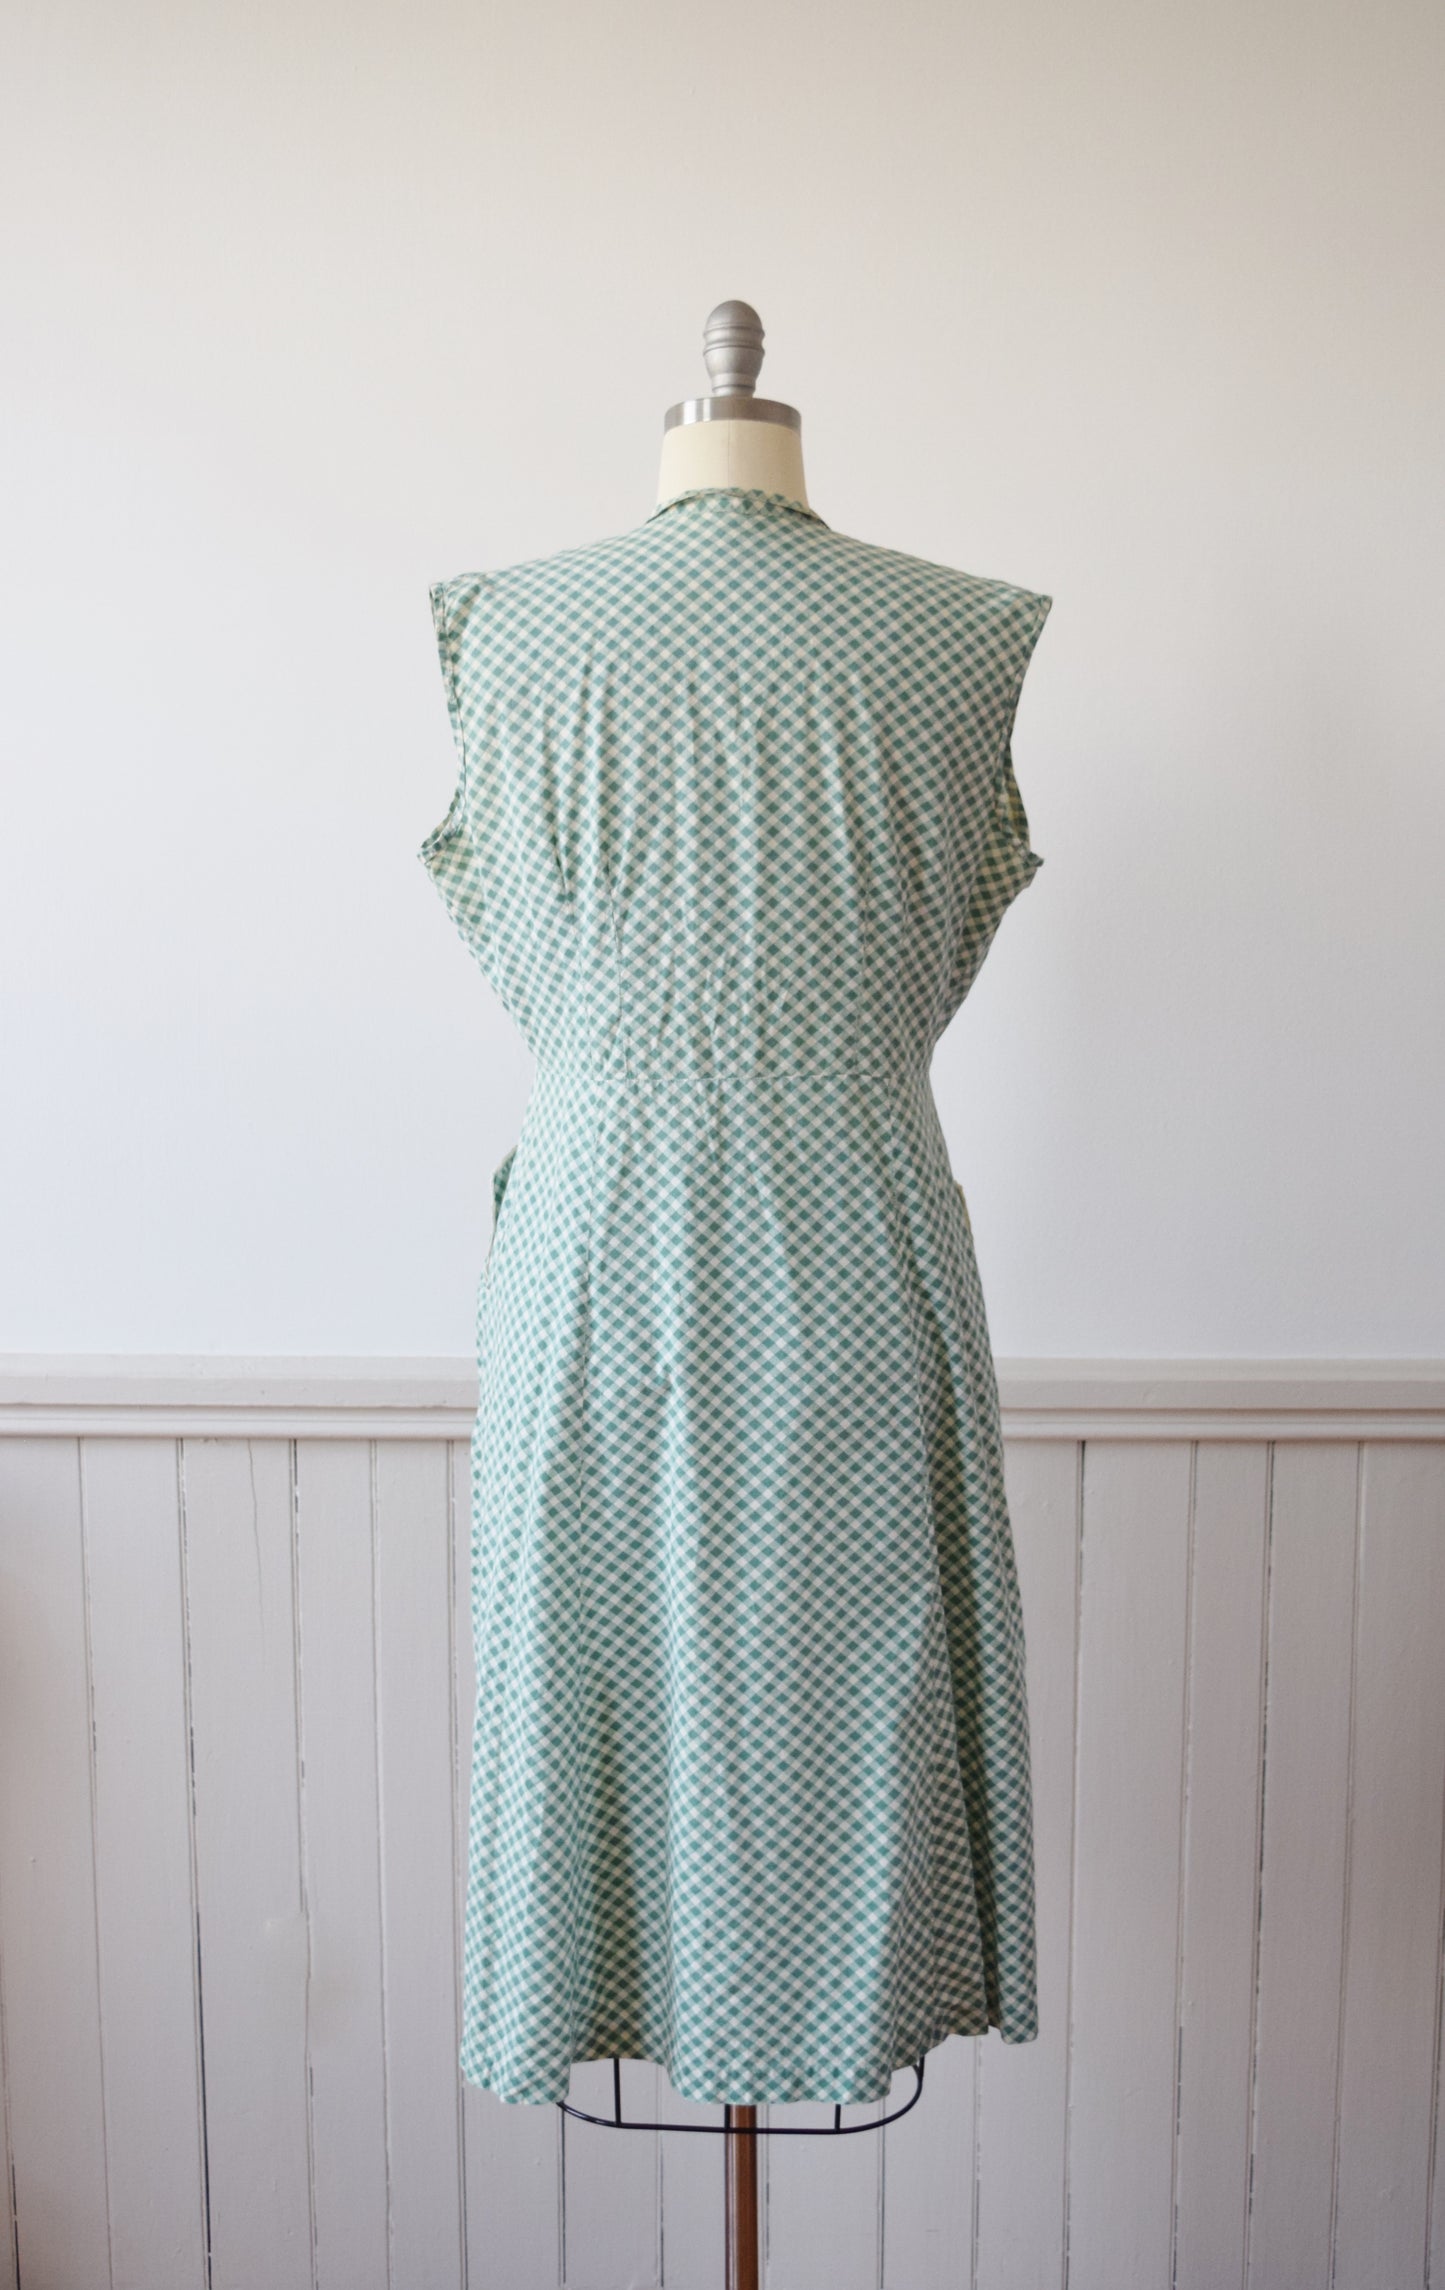 1930s/1940s Green + White Gingham Frock | Day Dress